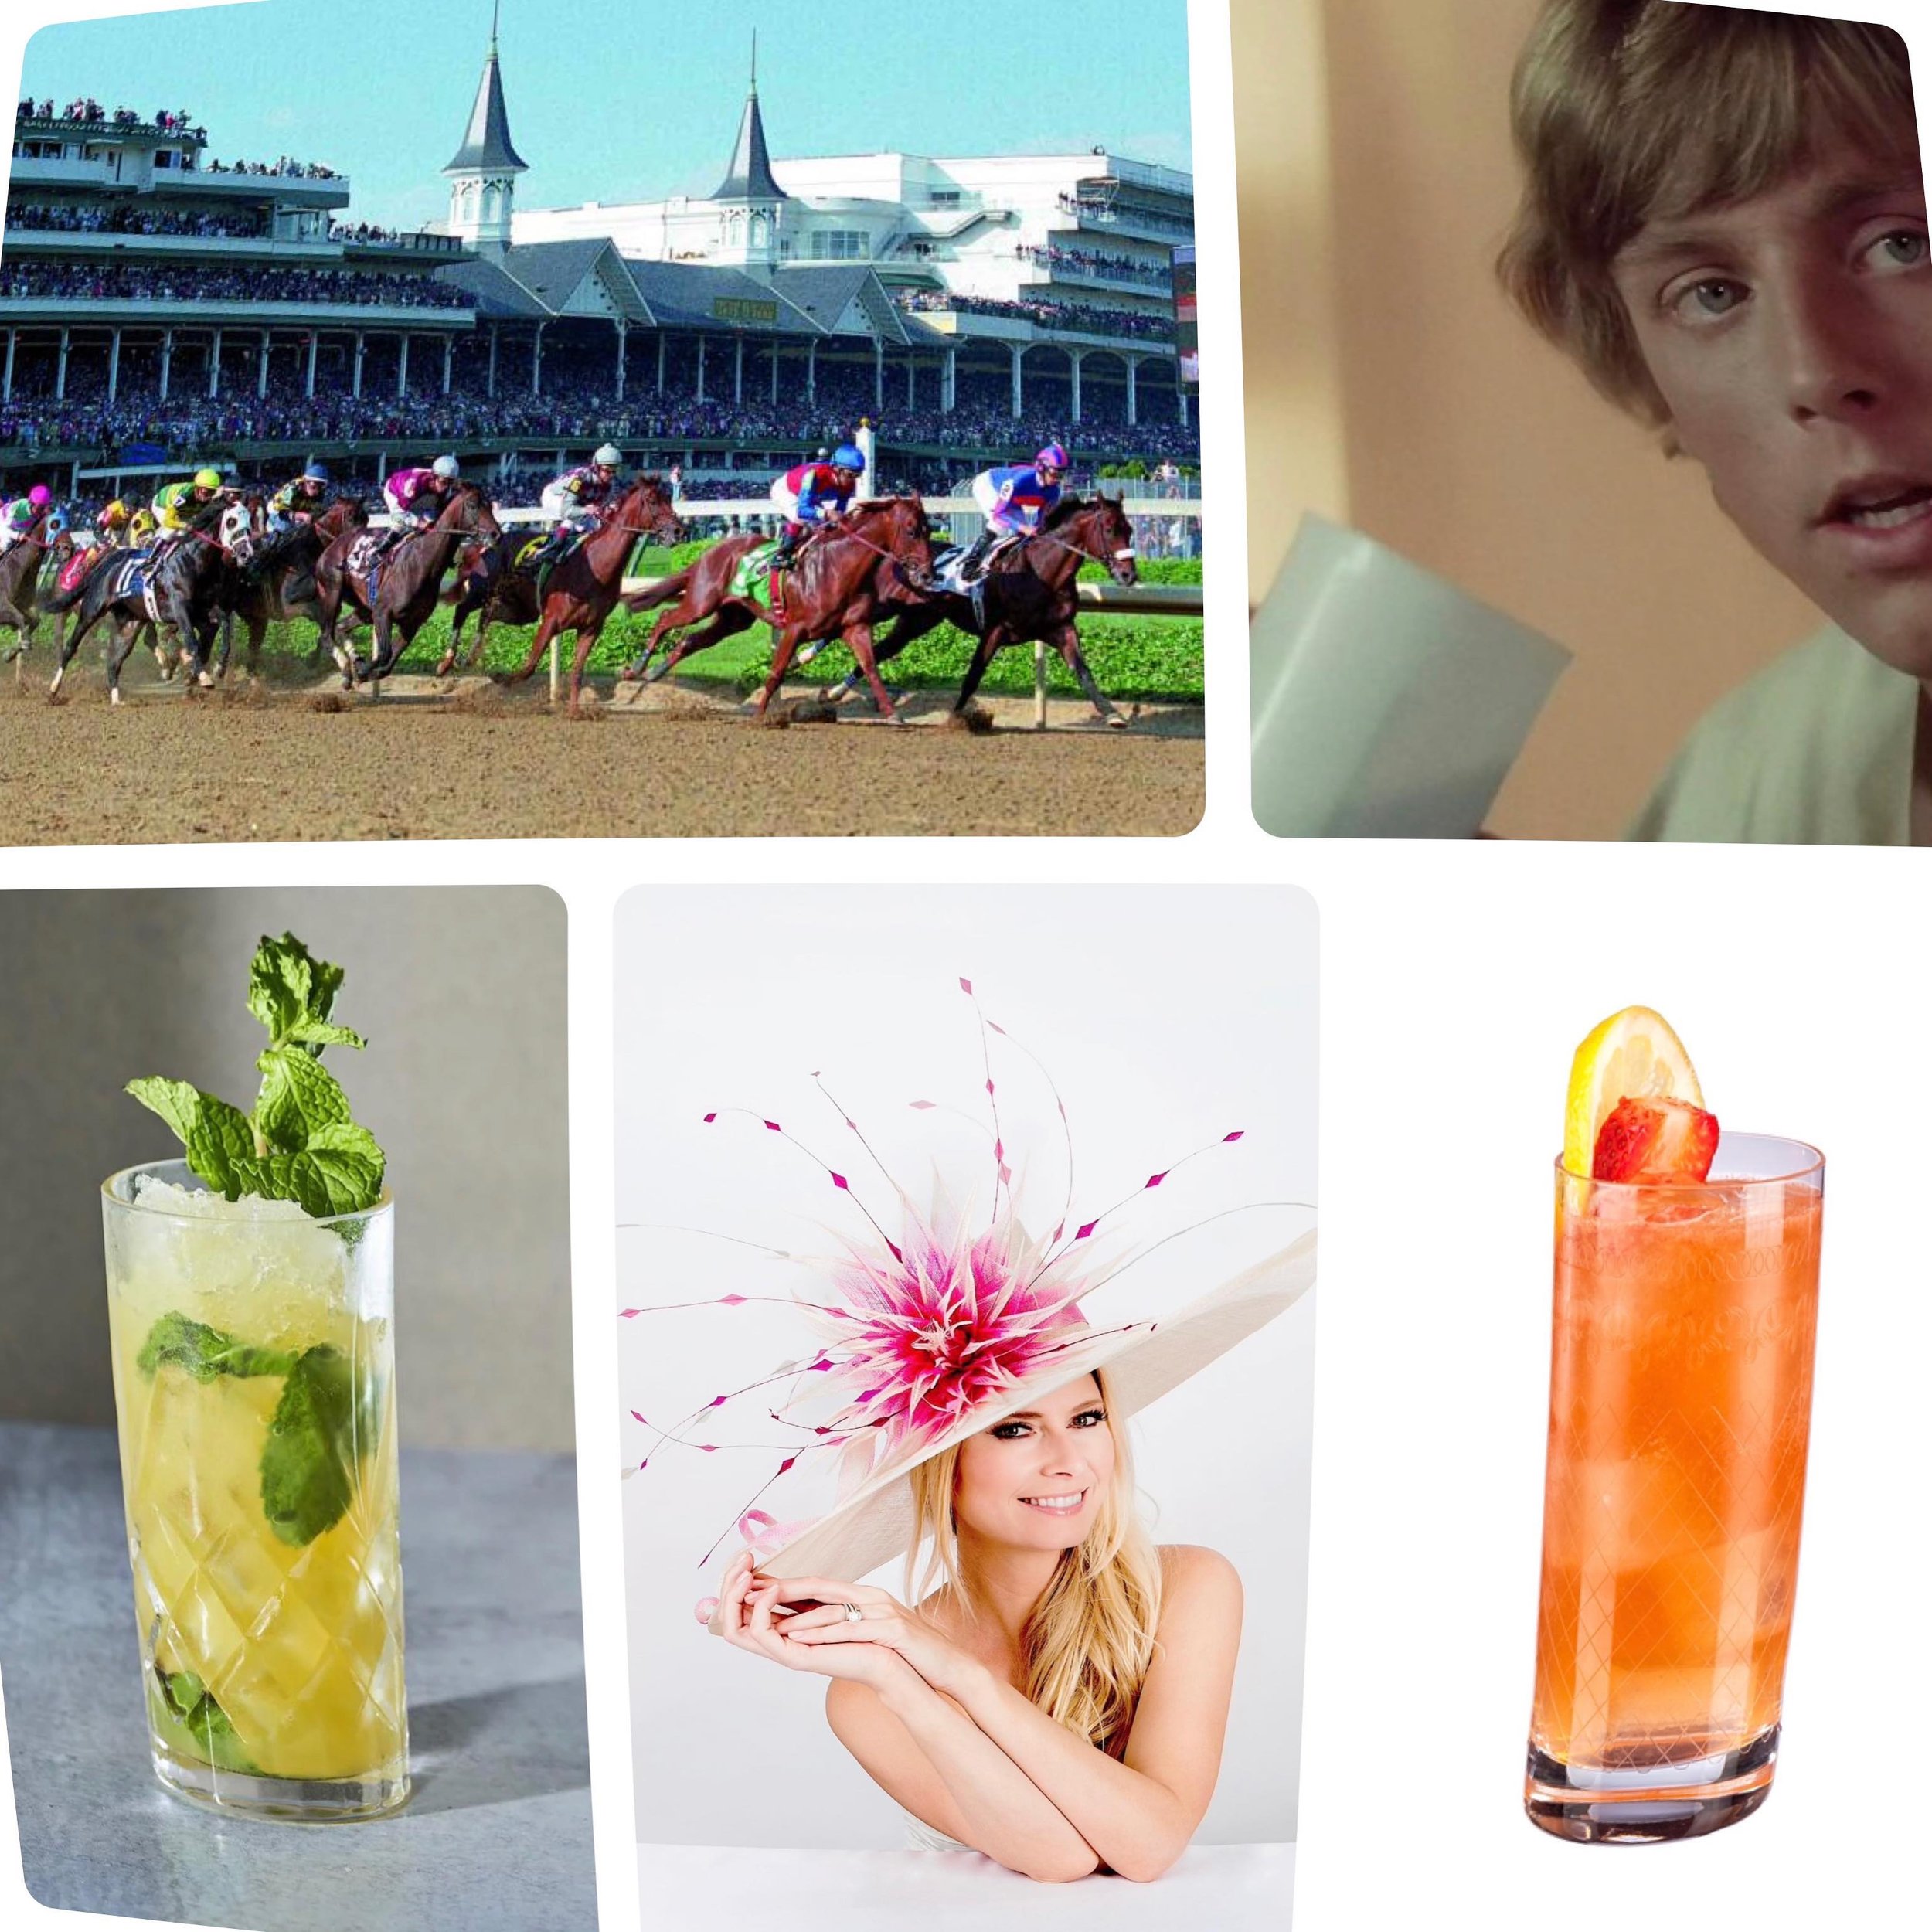 Join us this Saturday (5/4) for the Kentucky Derby. 🐎 We&rsquo;ll be featuring a Mint Julep, Kentucky Buck, and Blue Milk cocktail (May The Fourth Be With You). Race starts at 4pm. Big hats and/or Star Wars attire are more than welcome. 🎩 🥃🚀
&hel